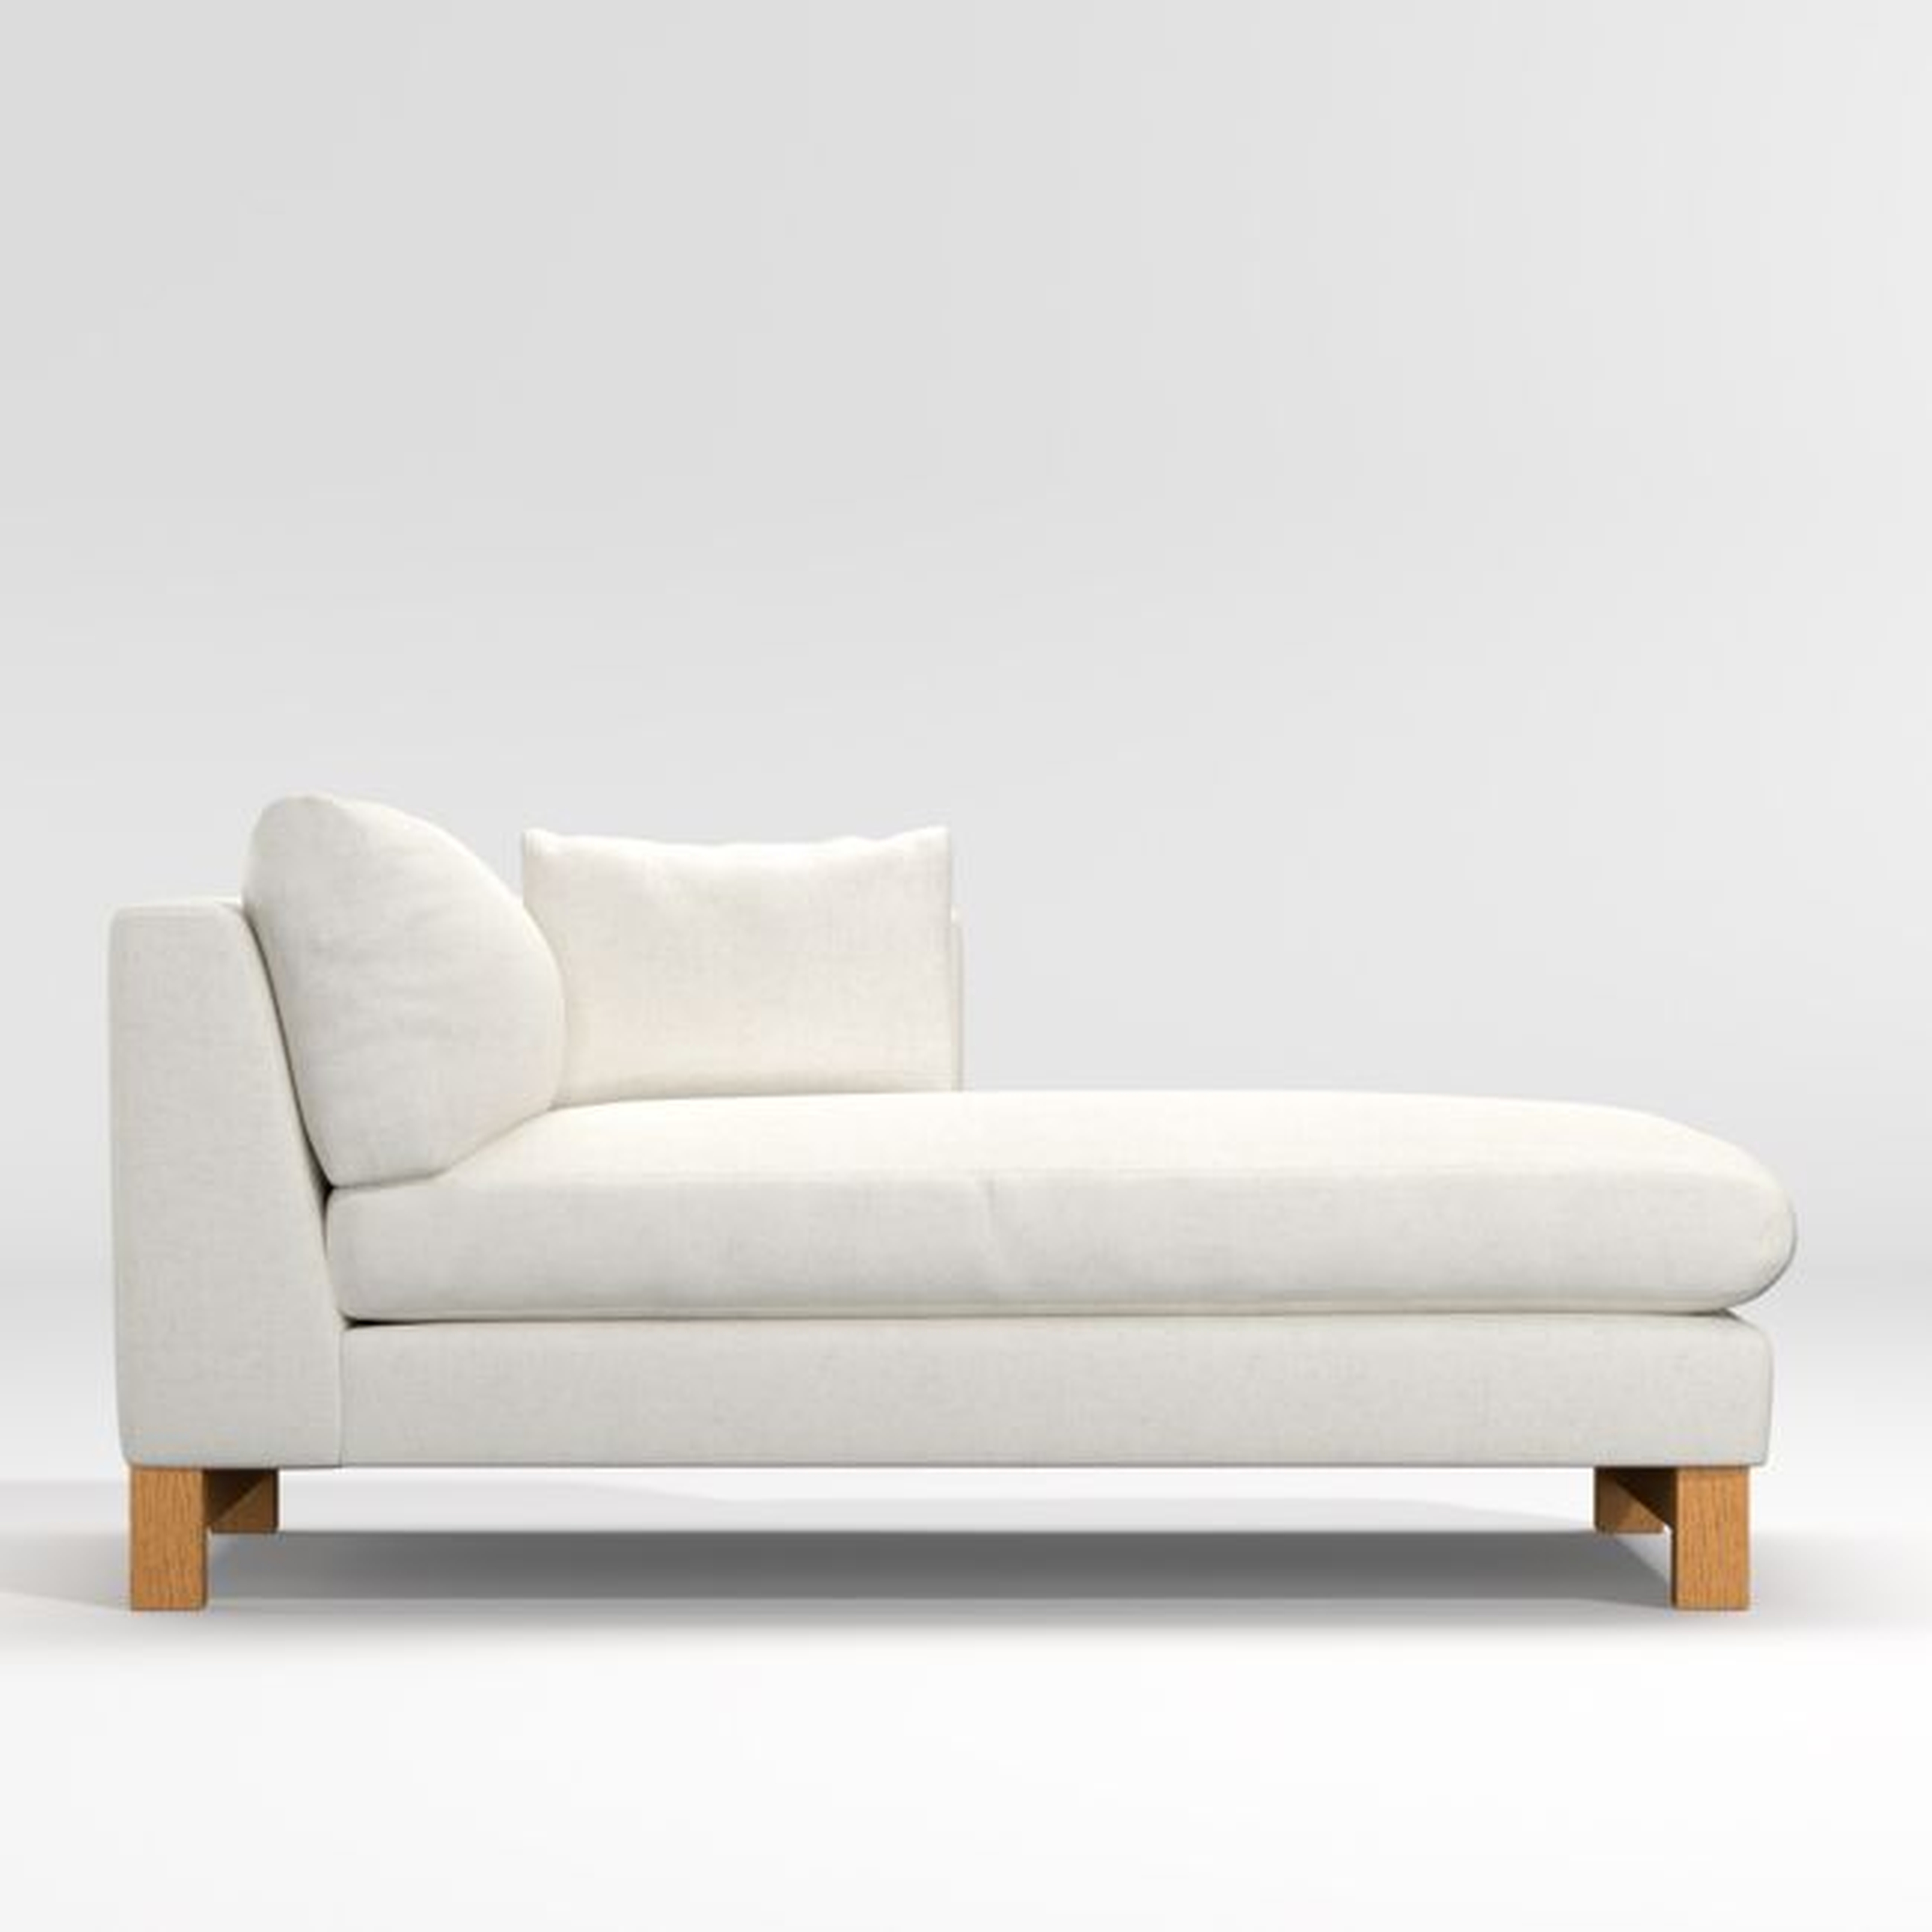 Pacific Right-Arm Chaise Lounge with Wood Legs - Crate and Barrel